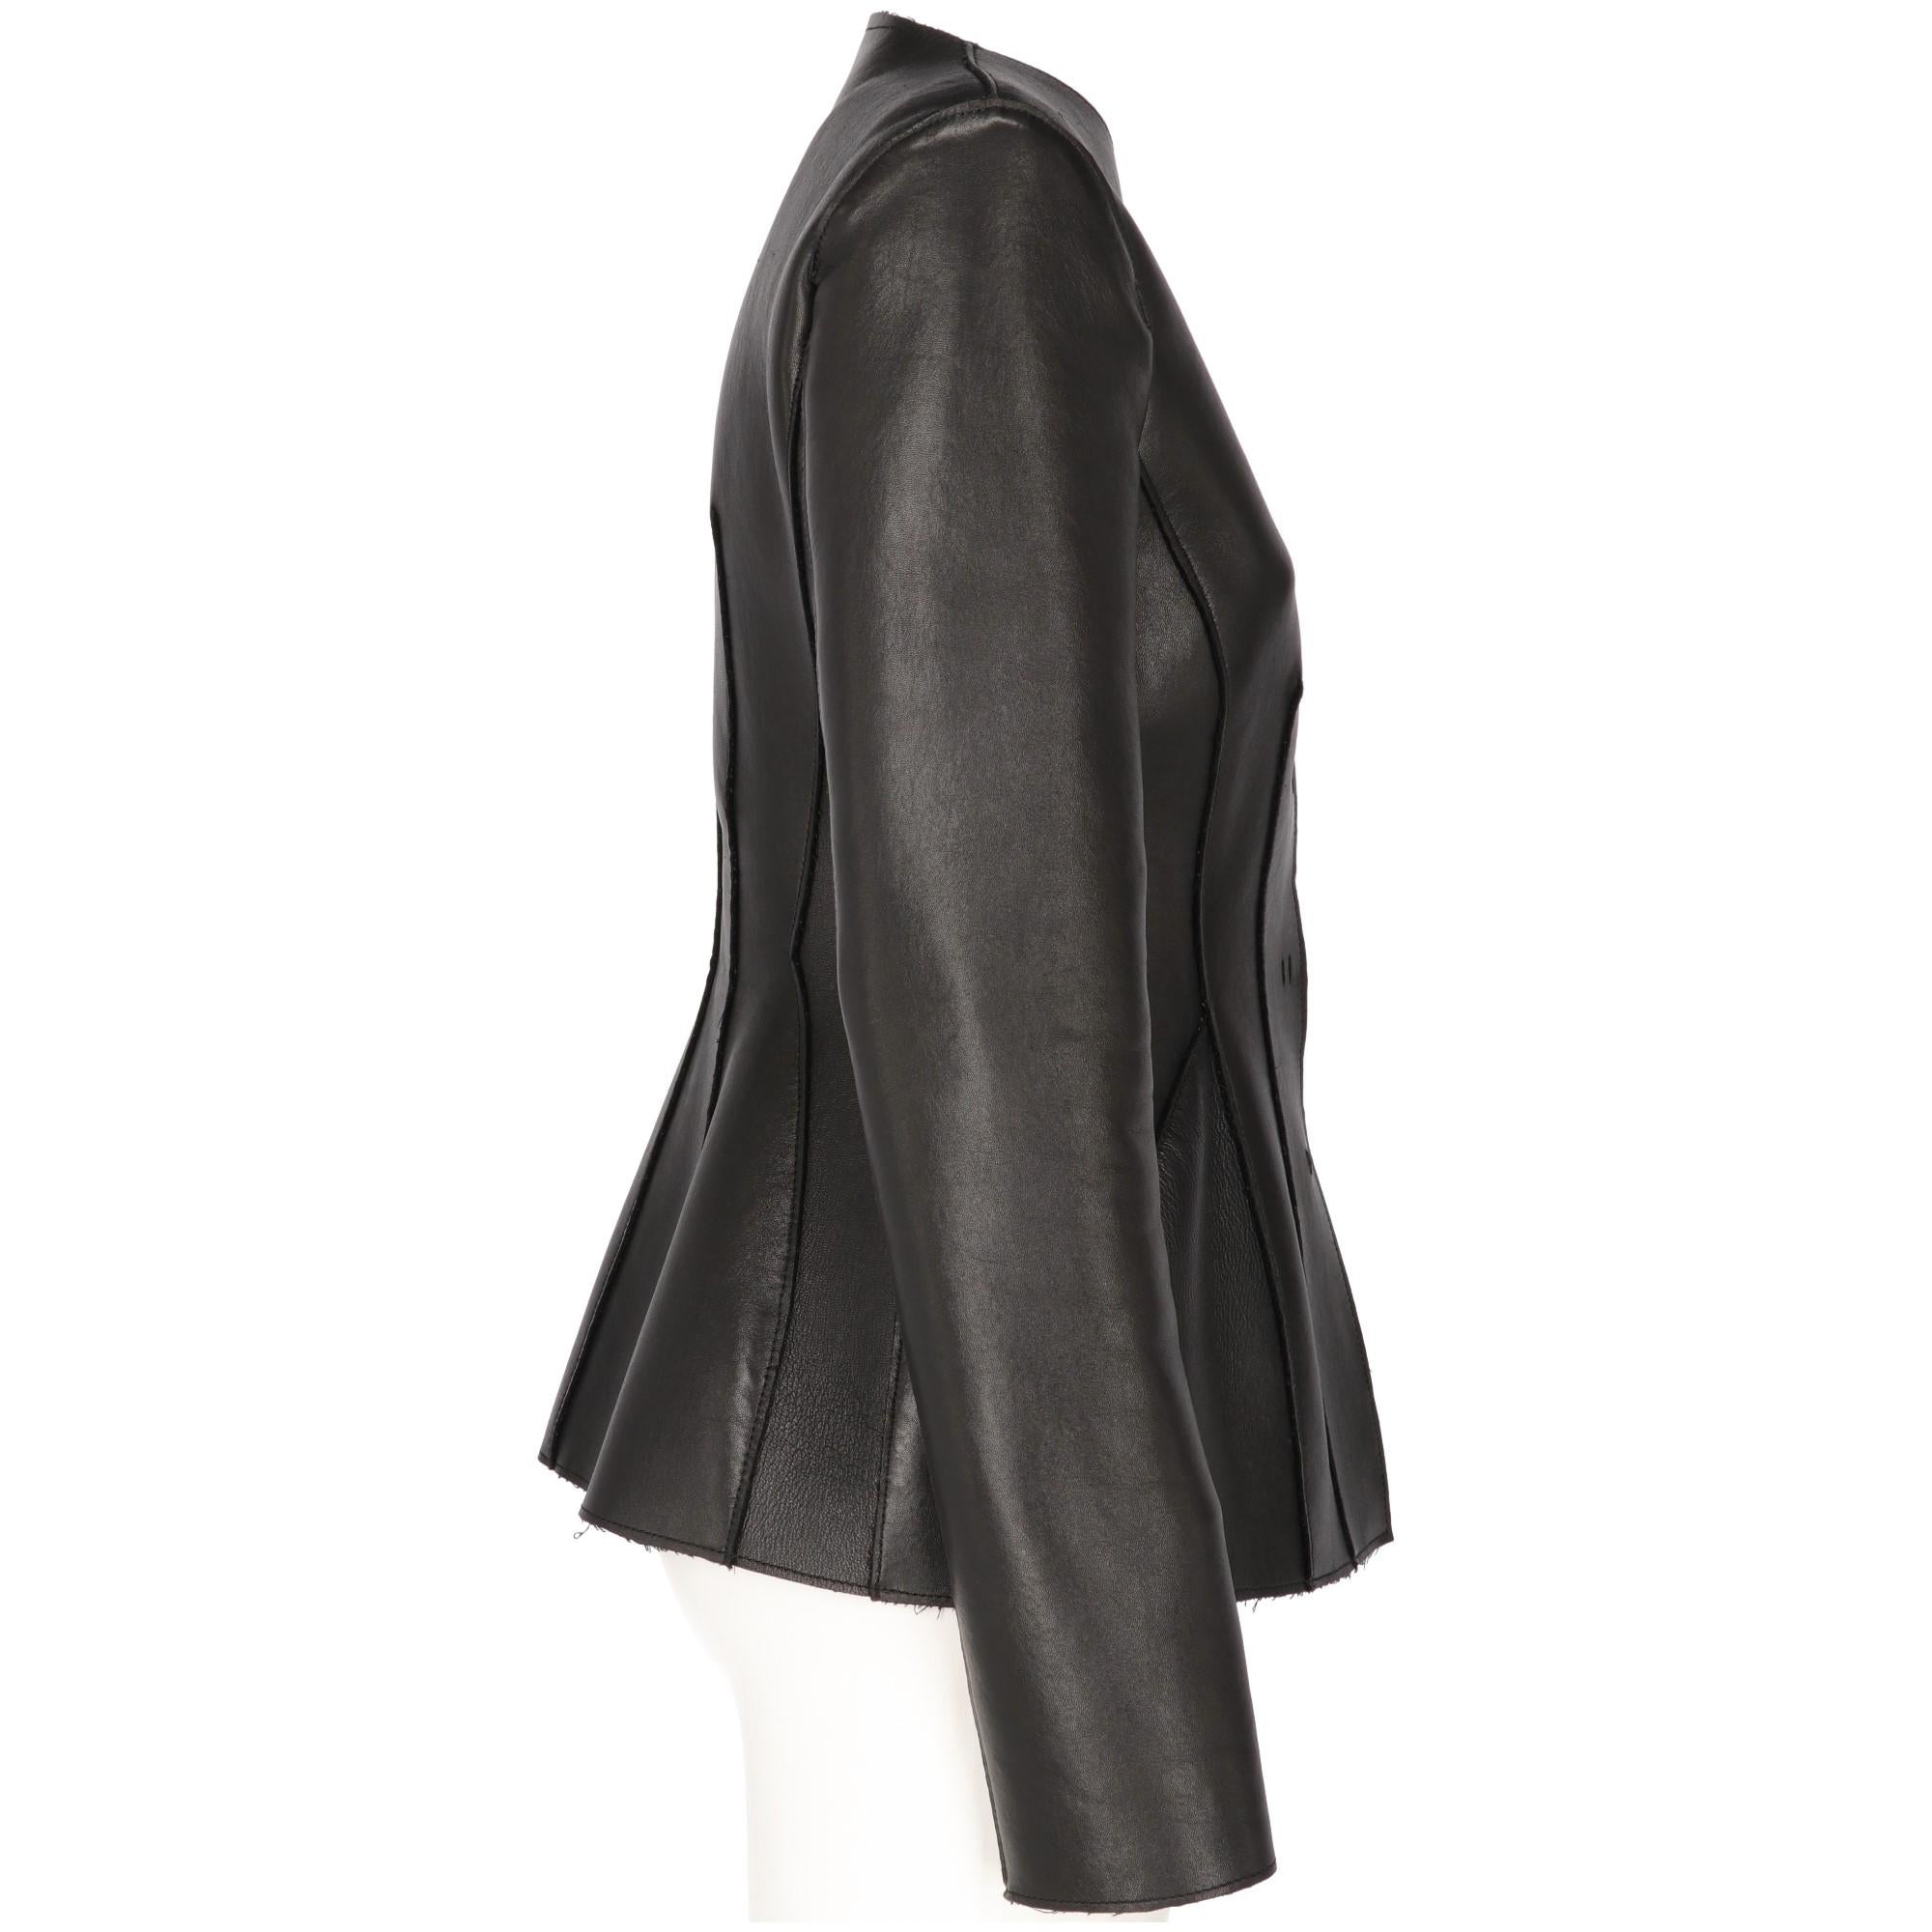 The stylish Alberta Ferretti black leather waist fit jacket features a large round neckline, with front buttoned fastening and decorative visible stitchings and raw edges.
Years: 2000s

Made in Italy 

Size: 42 IT

Linear measures

Height: 64